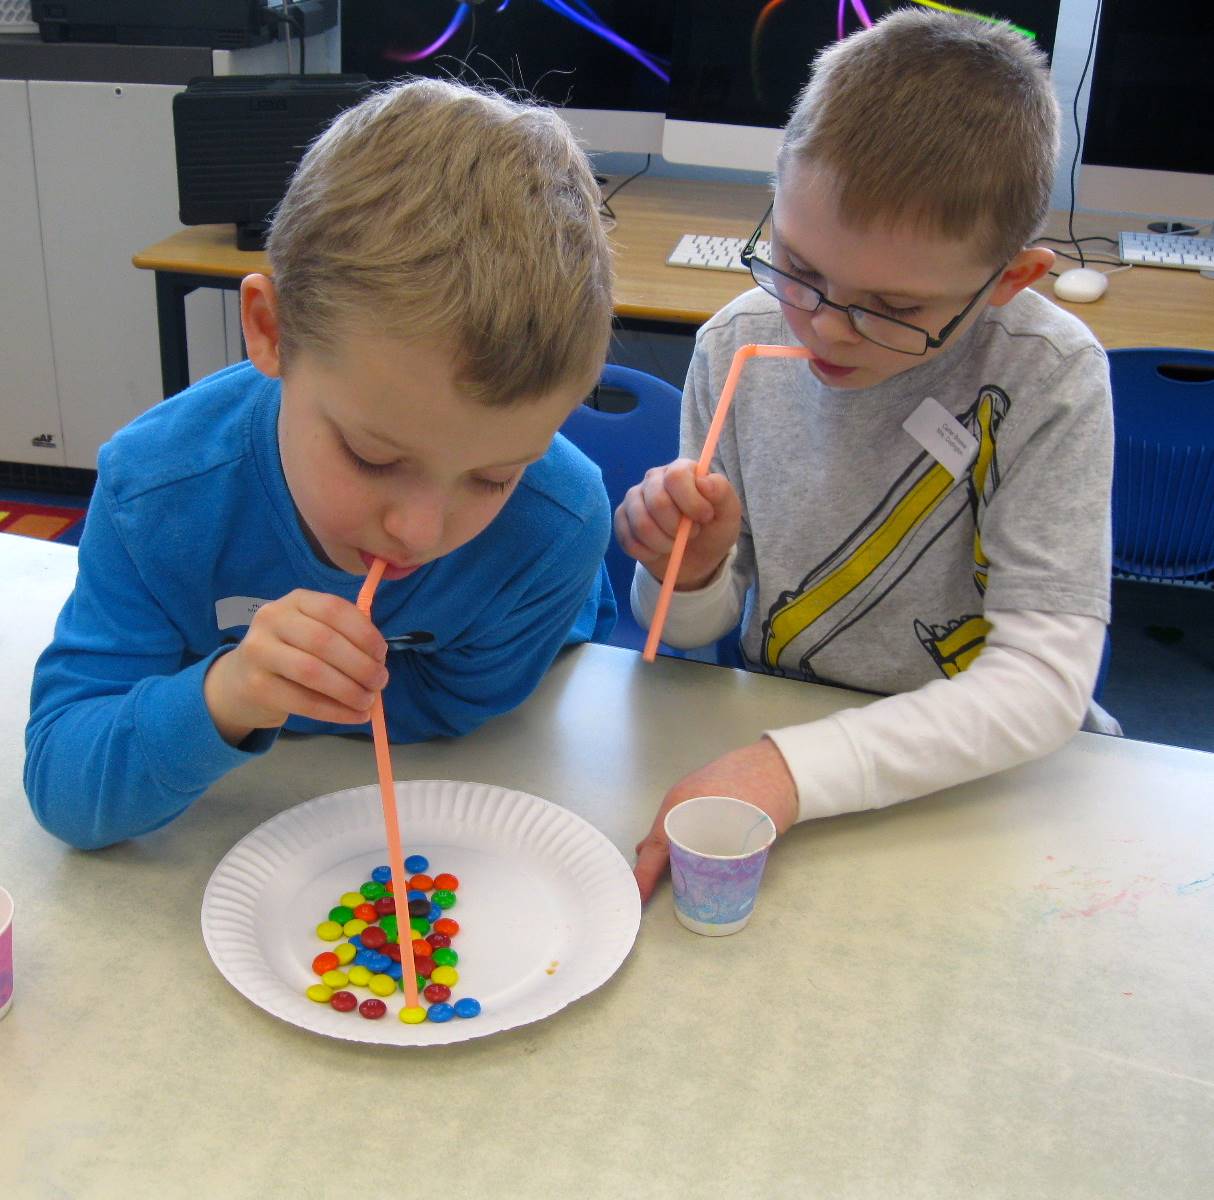 2 students using straws to move M&Ms